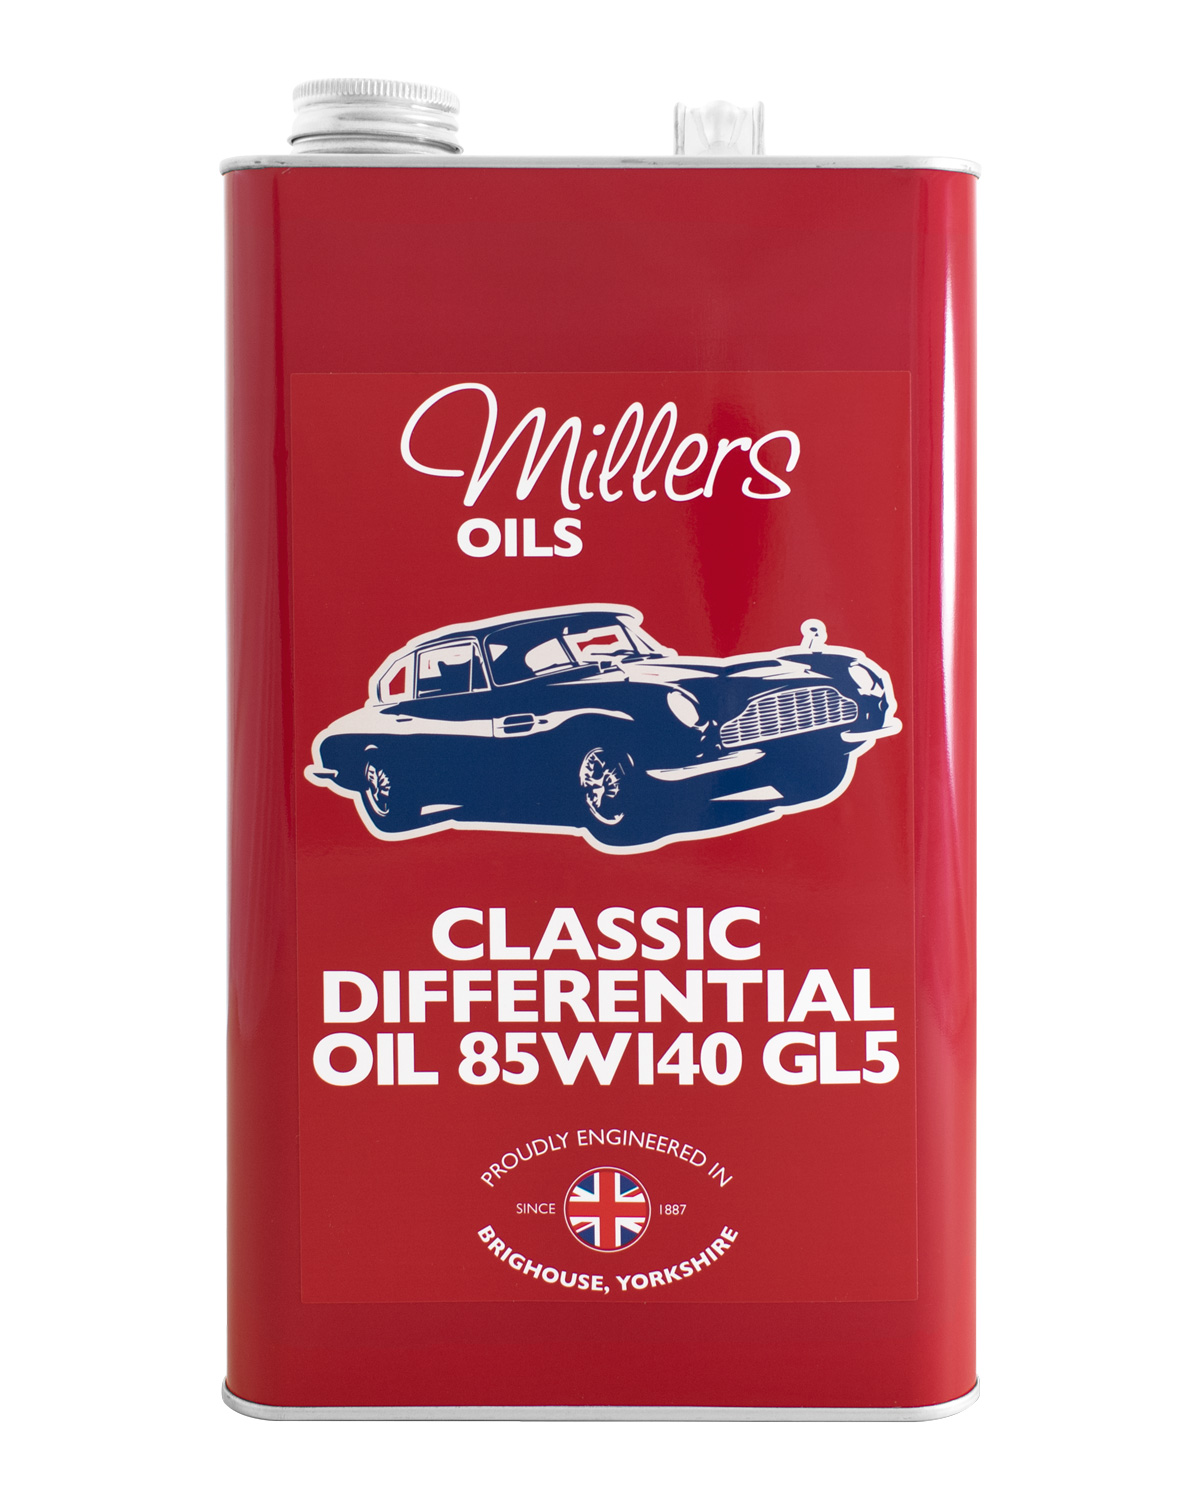 Millers Oils Classic Differential Oil 85W140 GL5, 5 Liter